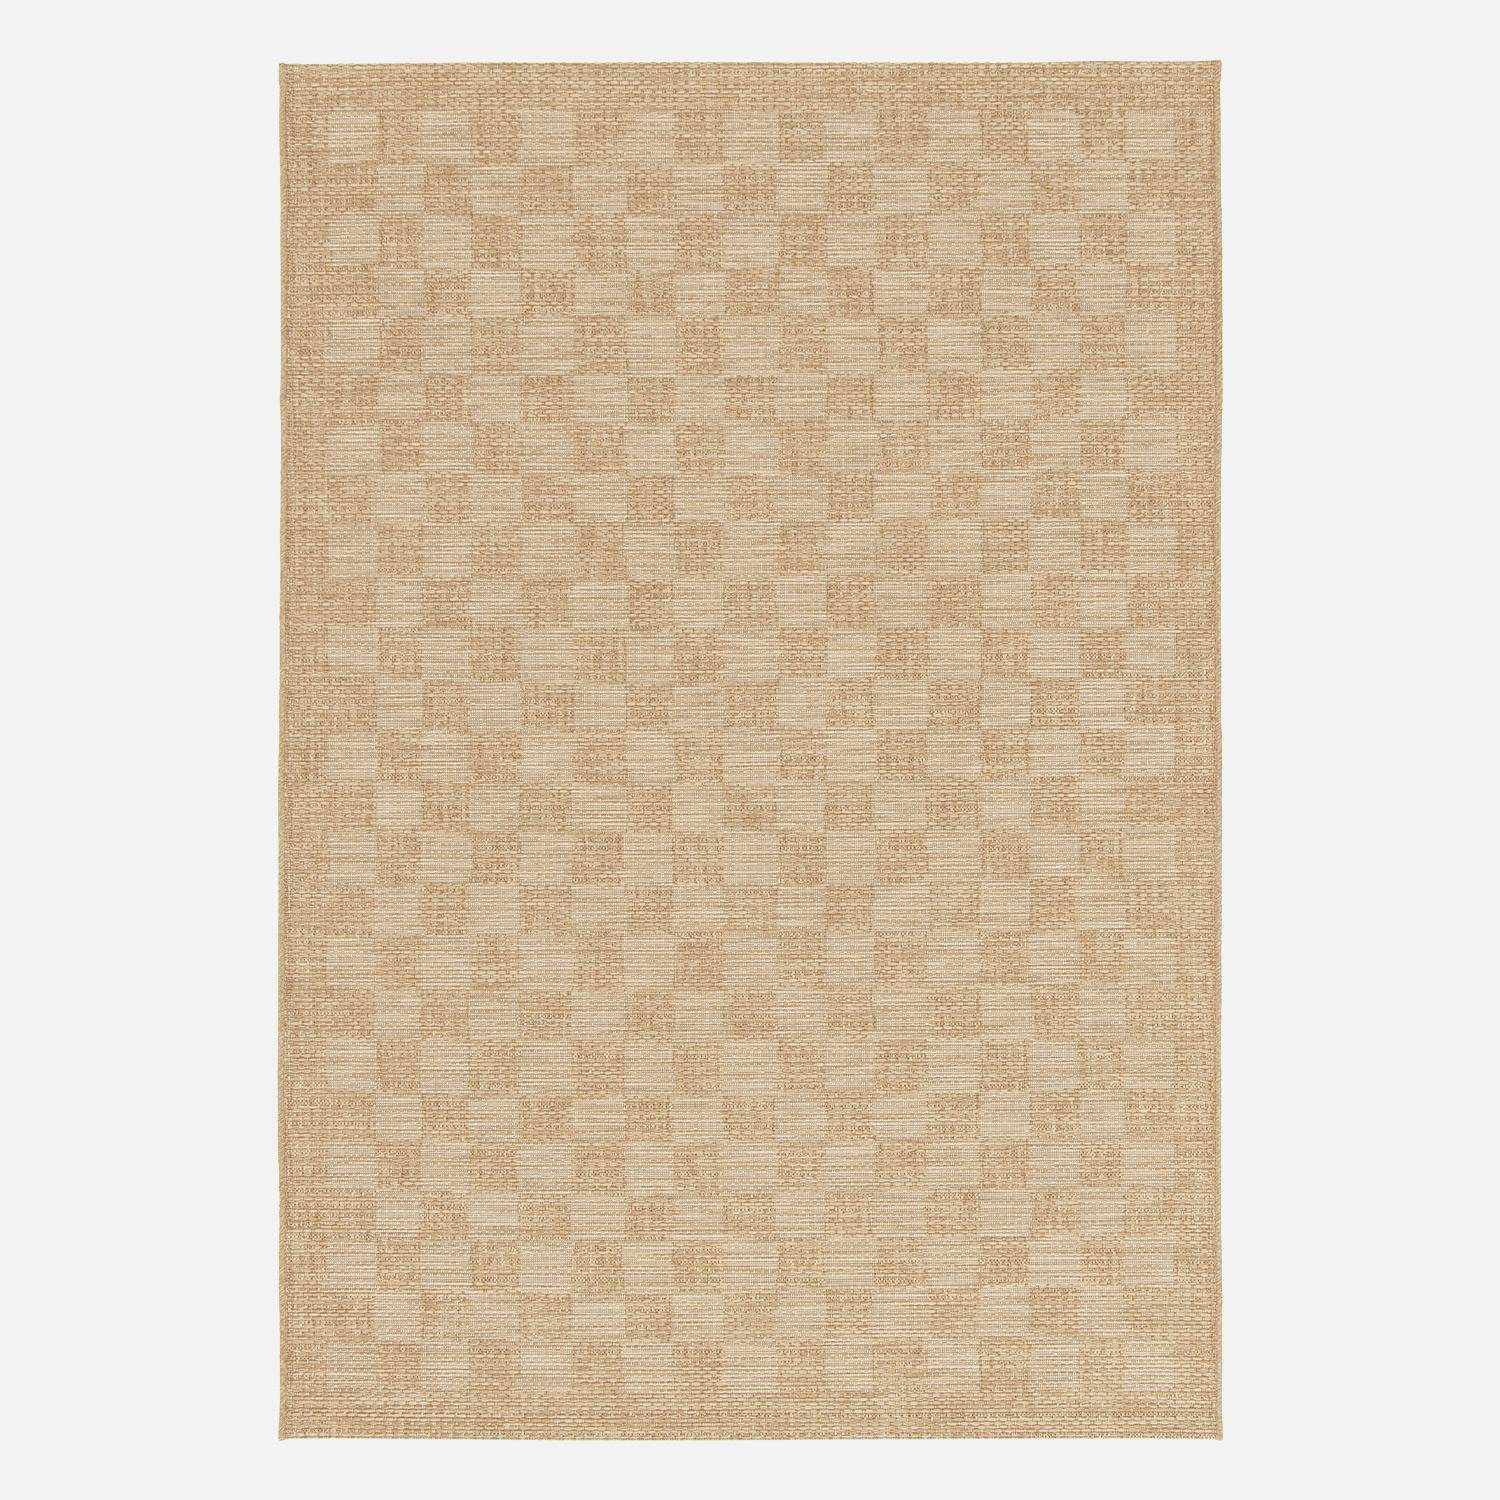 Jute-effect indoor/outdoor carpet with chequered pattern, Carrie, 120 x 170 cm,sweeek,Photo1